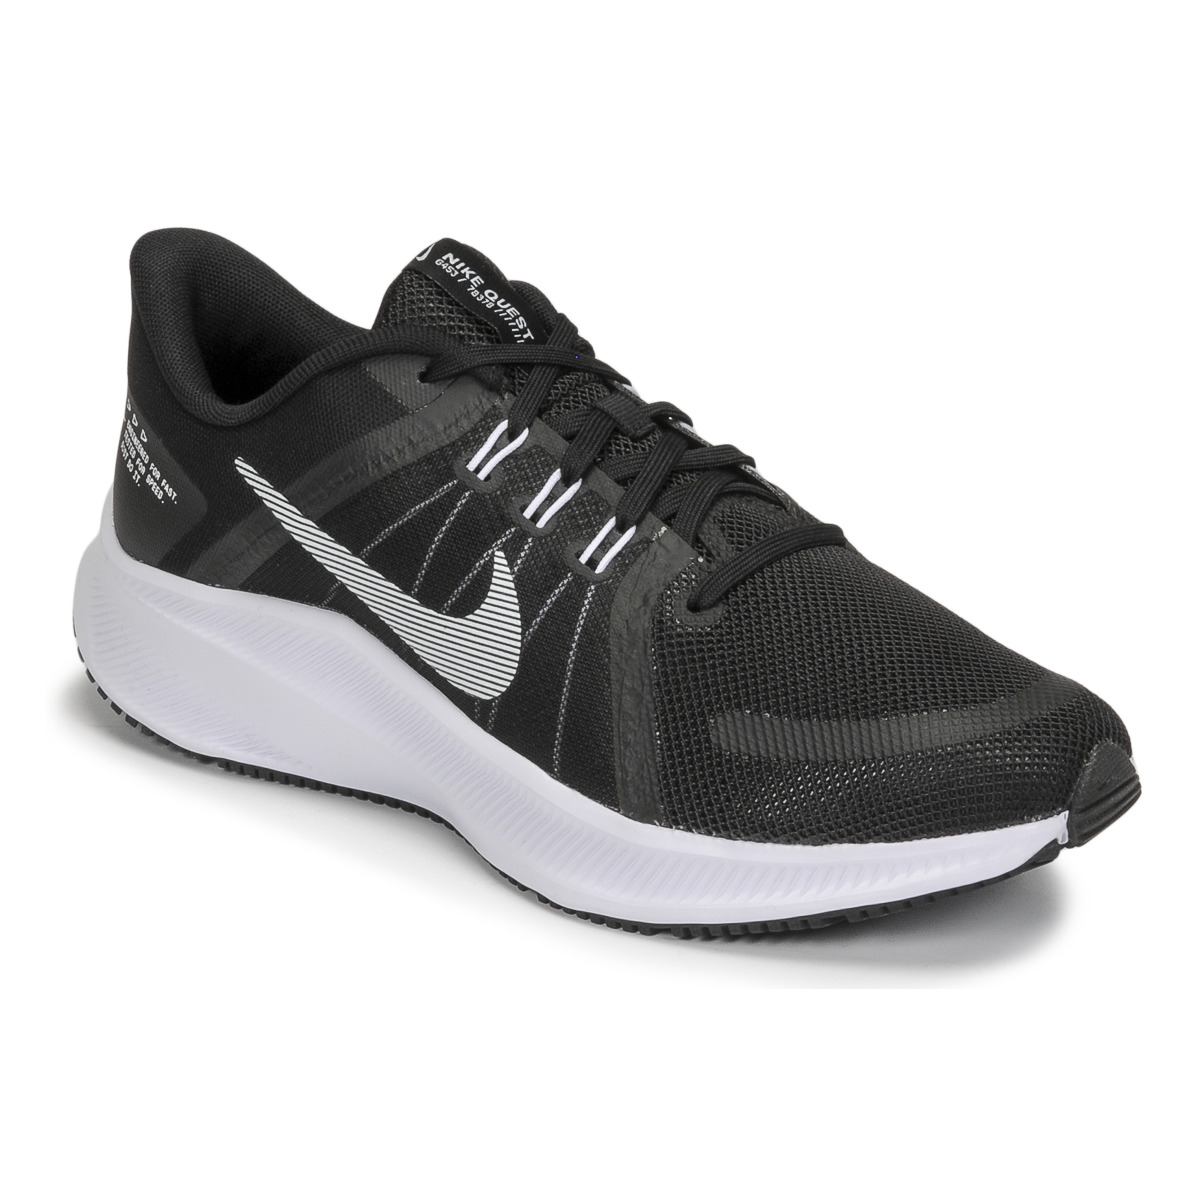 WMNS NIKE QUEST 4 Black / White - Fast delivery | Spartoo Europe ! - Shoes Running-shoes Women